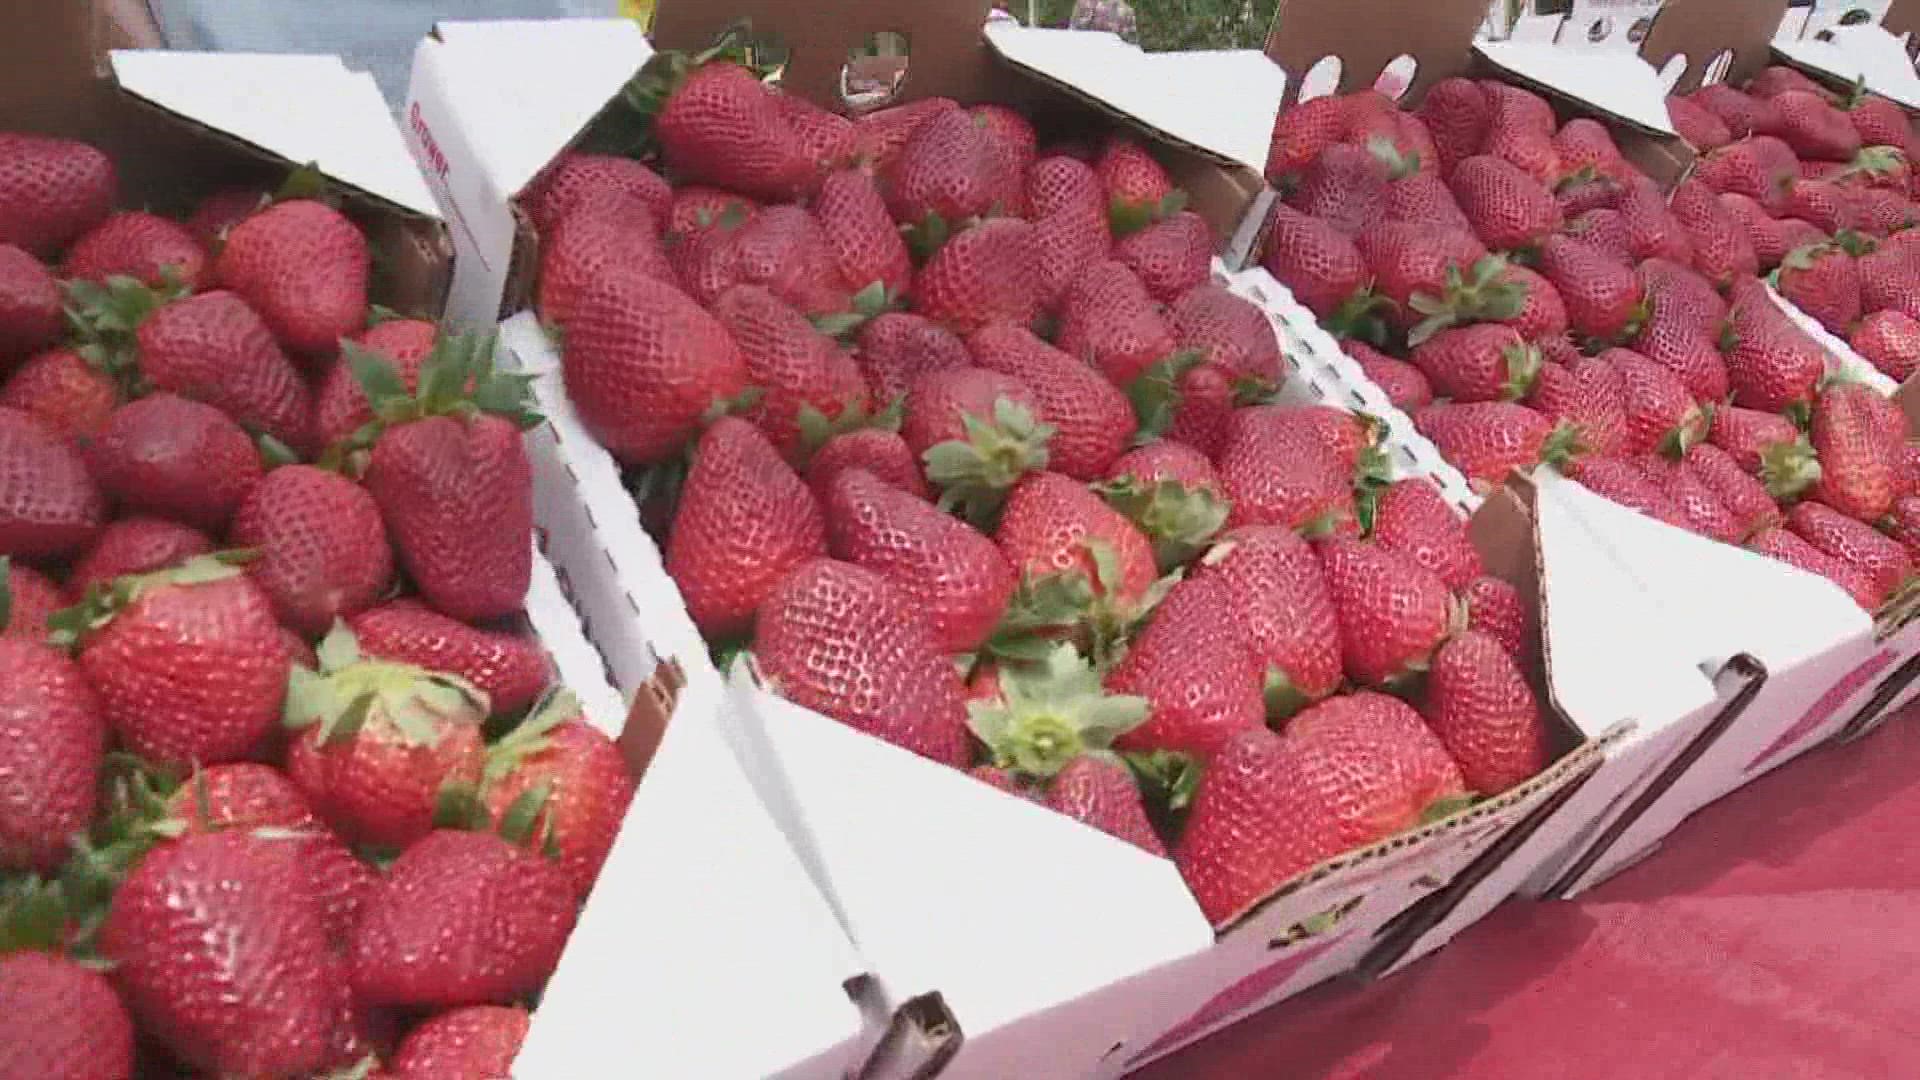 Candese Charles previews the return of the Strawberry Festival, which is celebrating its 50th anniversary.